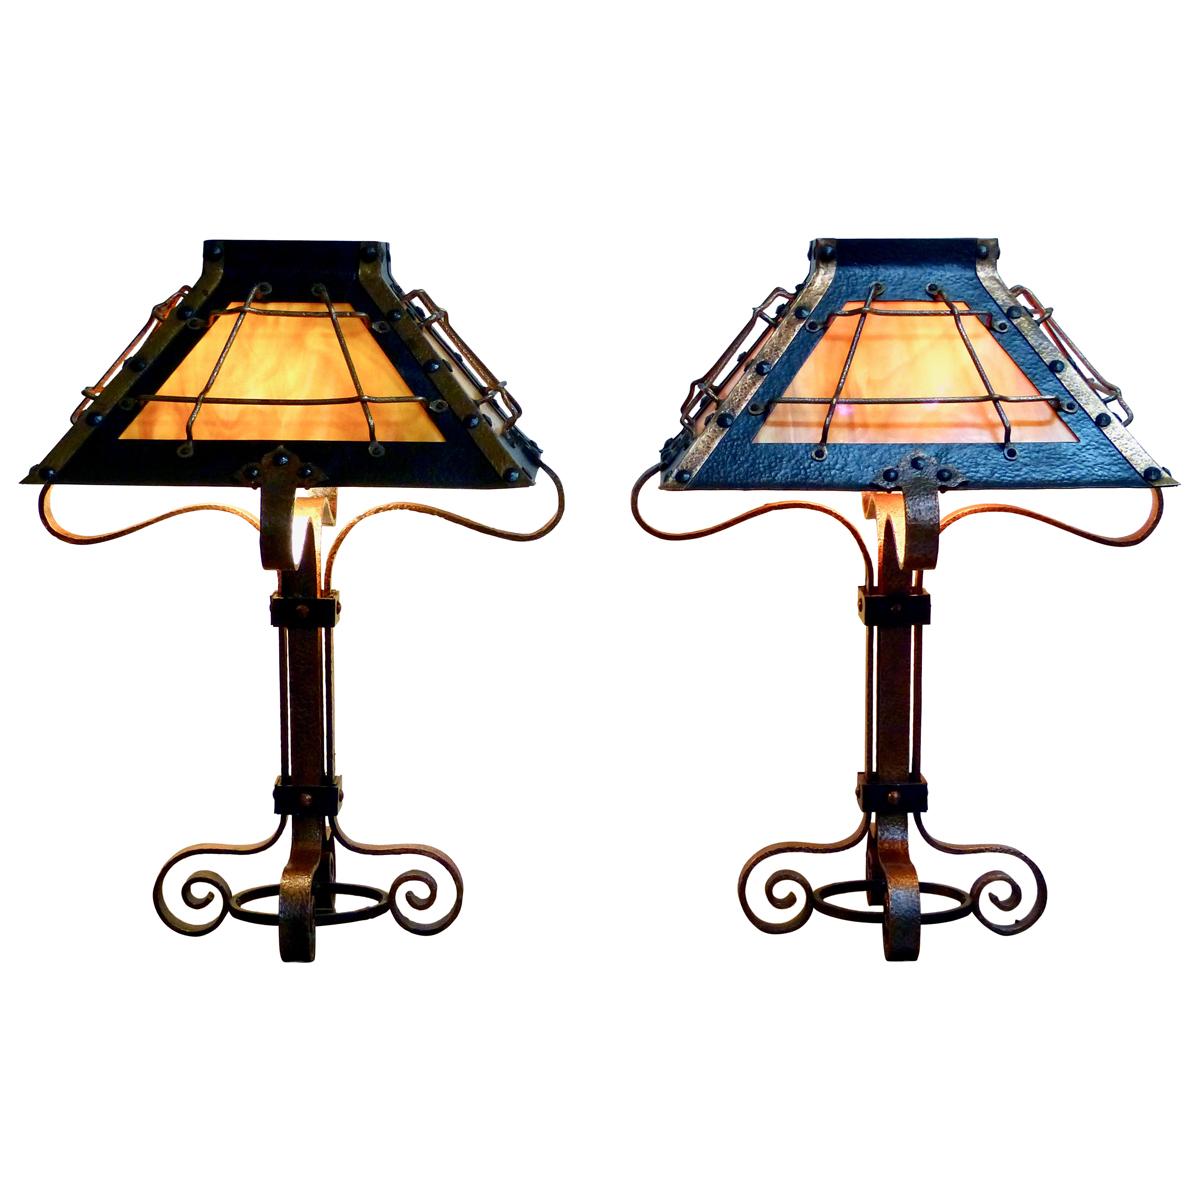 Antique Arts & Crafts Misson Hammered Iron and Copper Pair of Lamps, circa 1900 For Sale